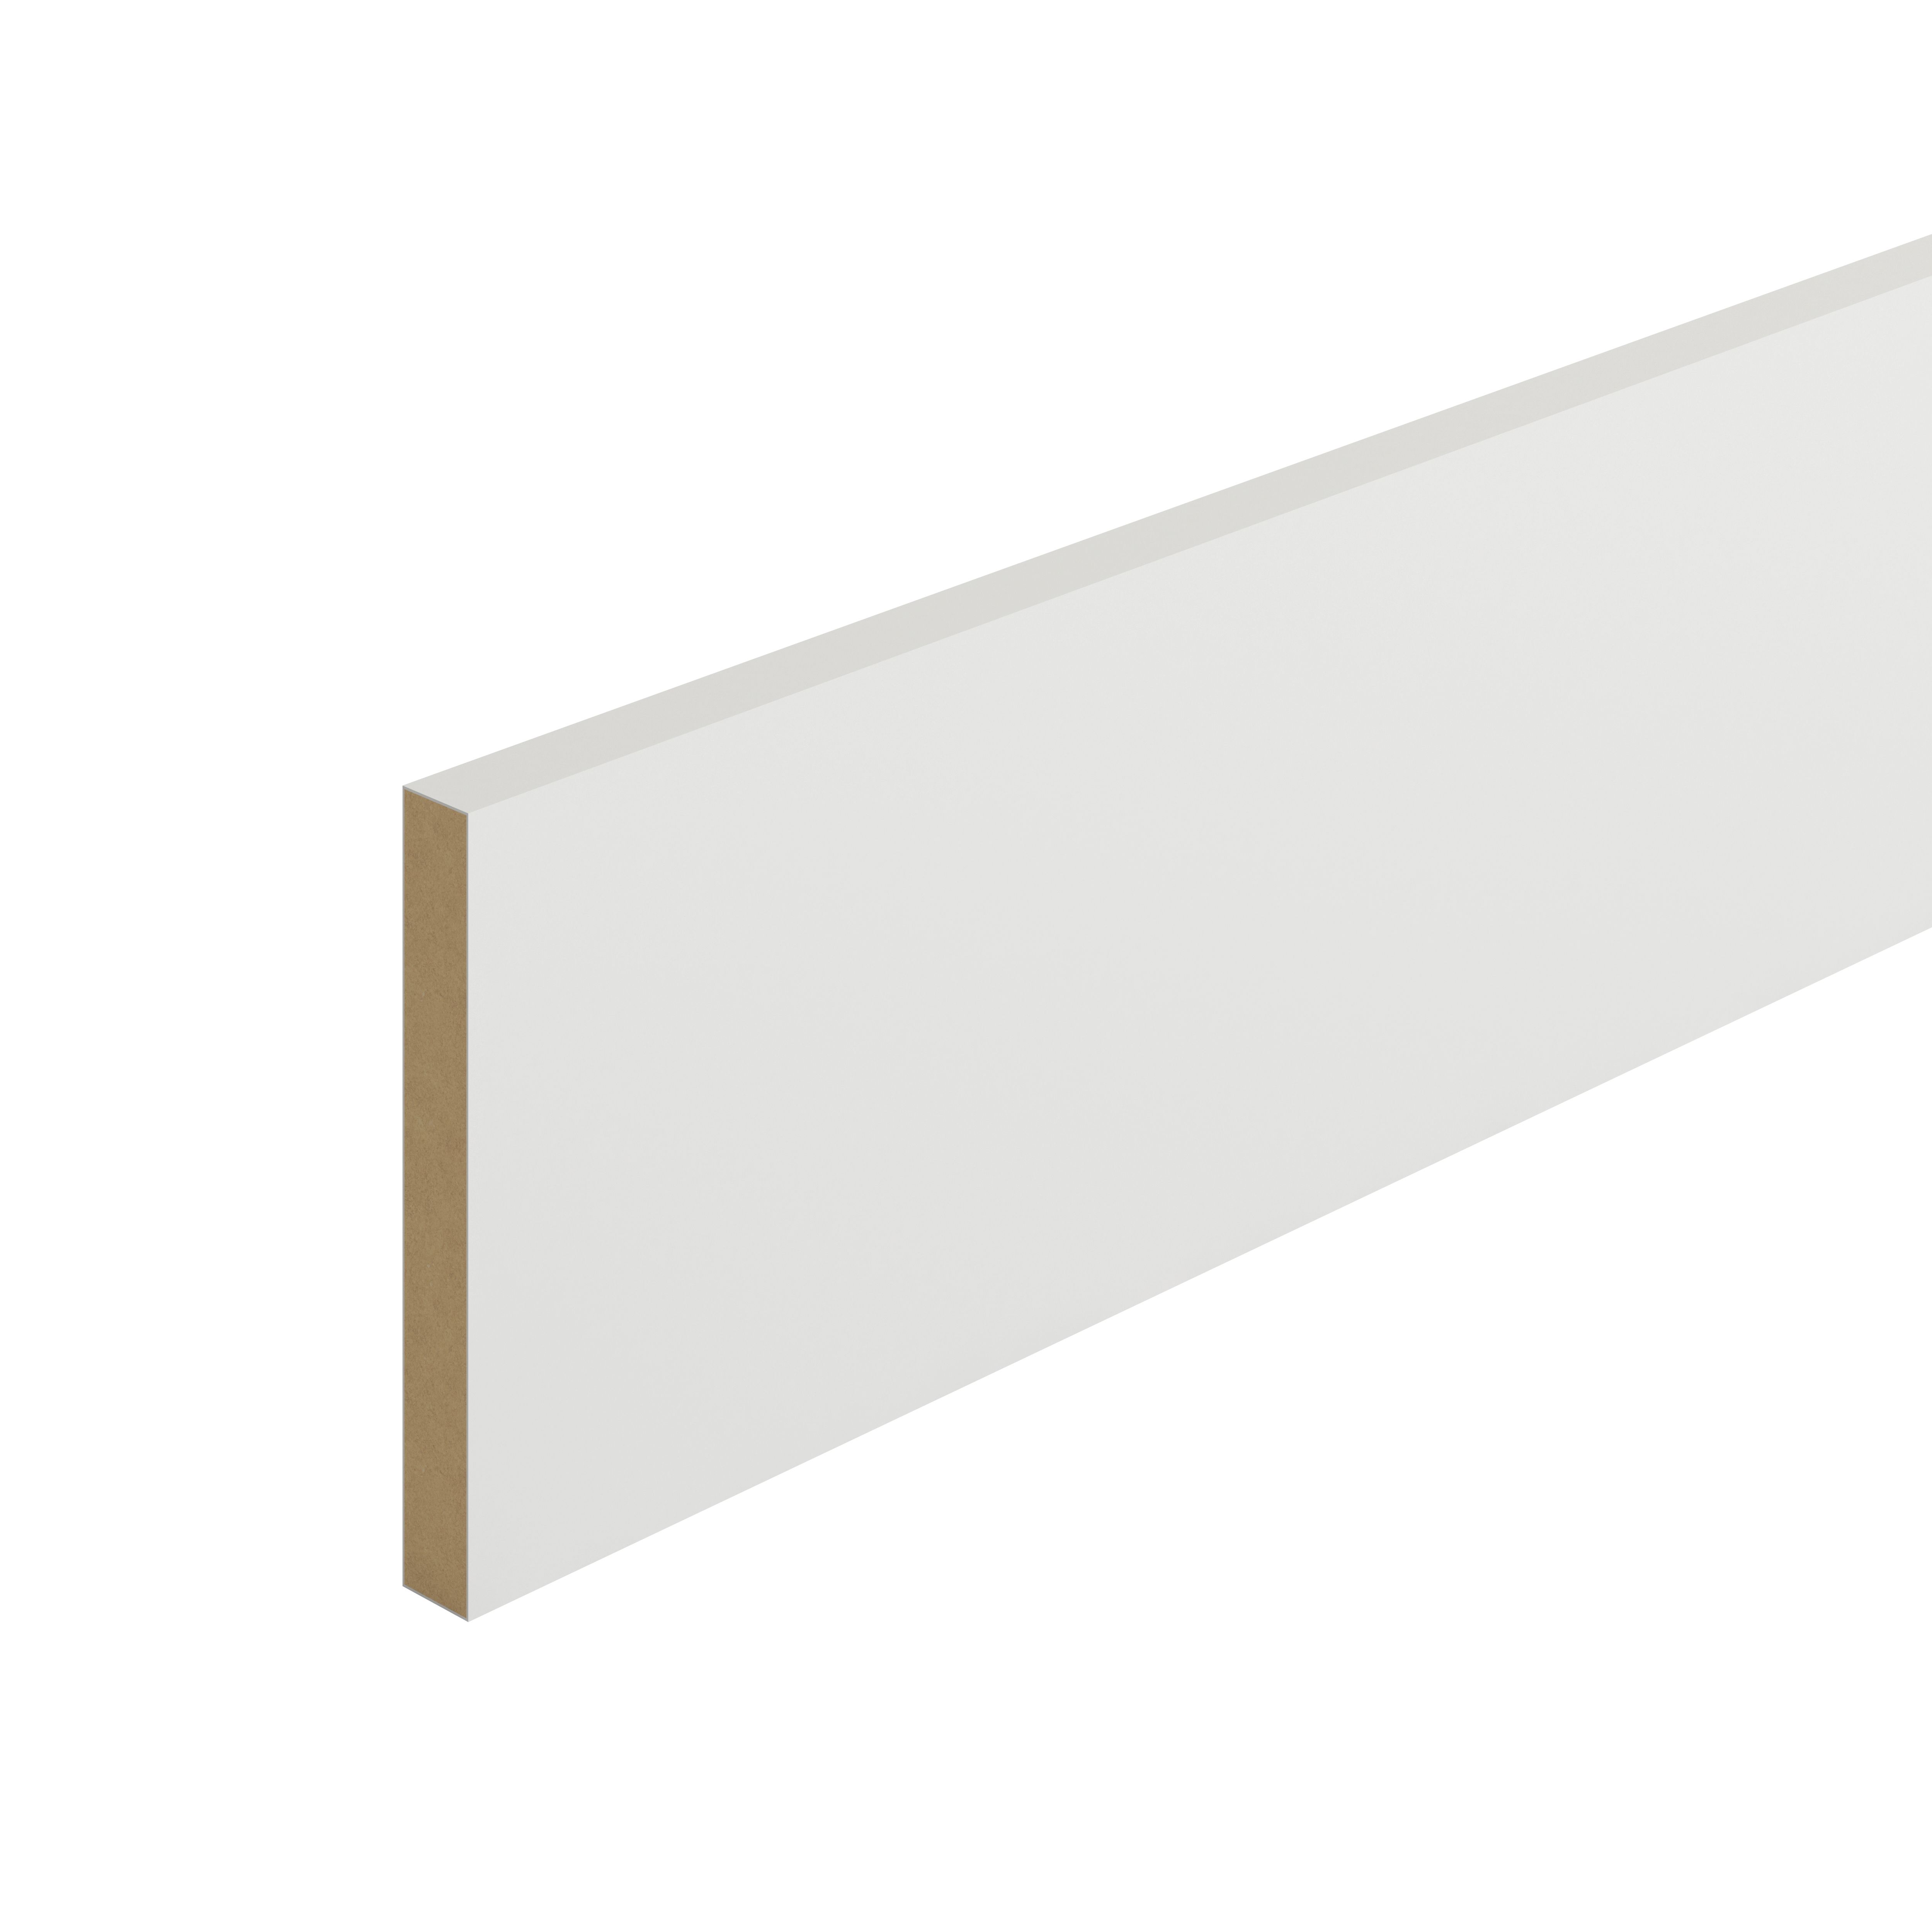 Metsä Wood Primed White MDF Square Skirting board (L)2.4m (W)144mm (T)18mm, Pack of 2